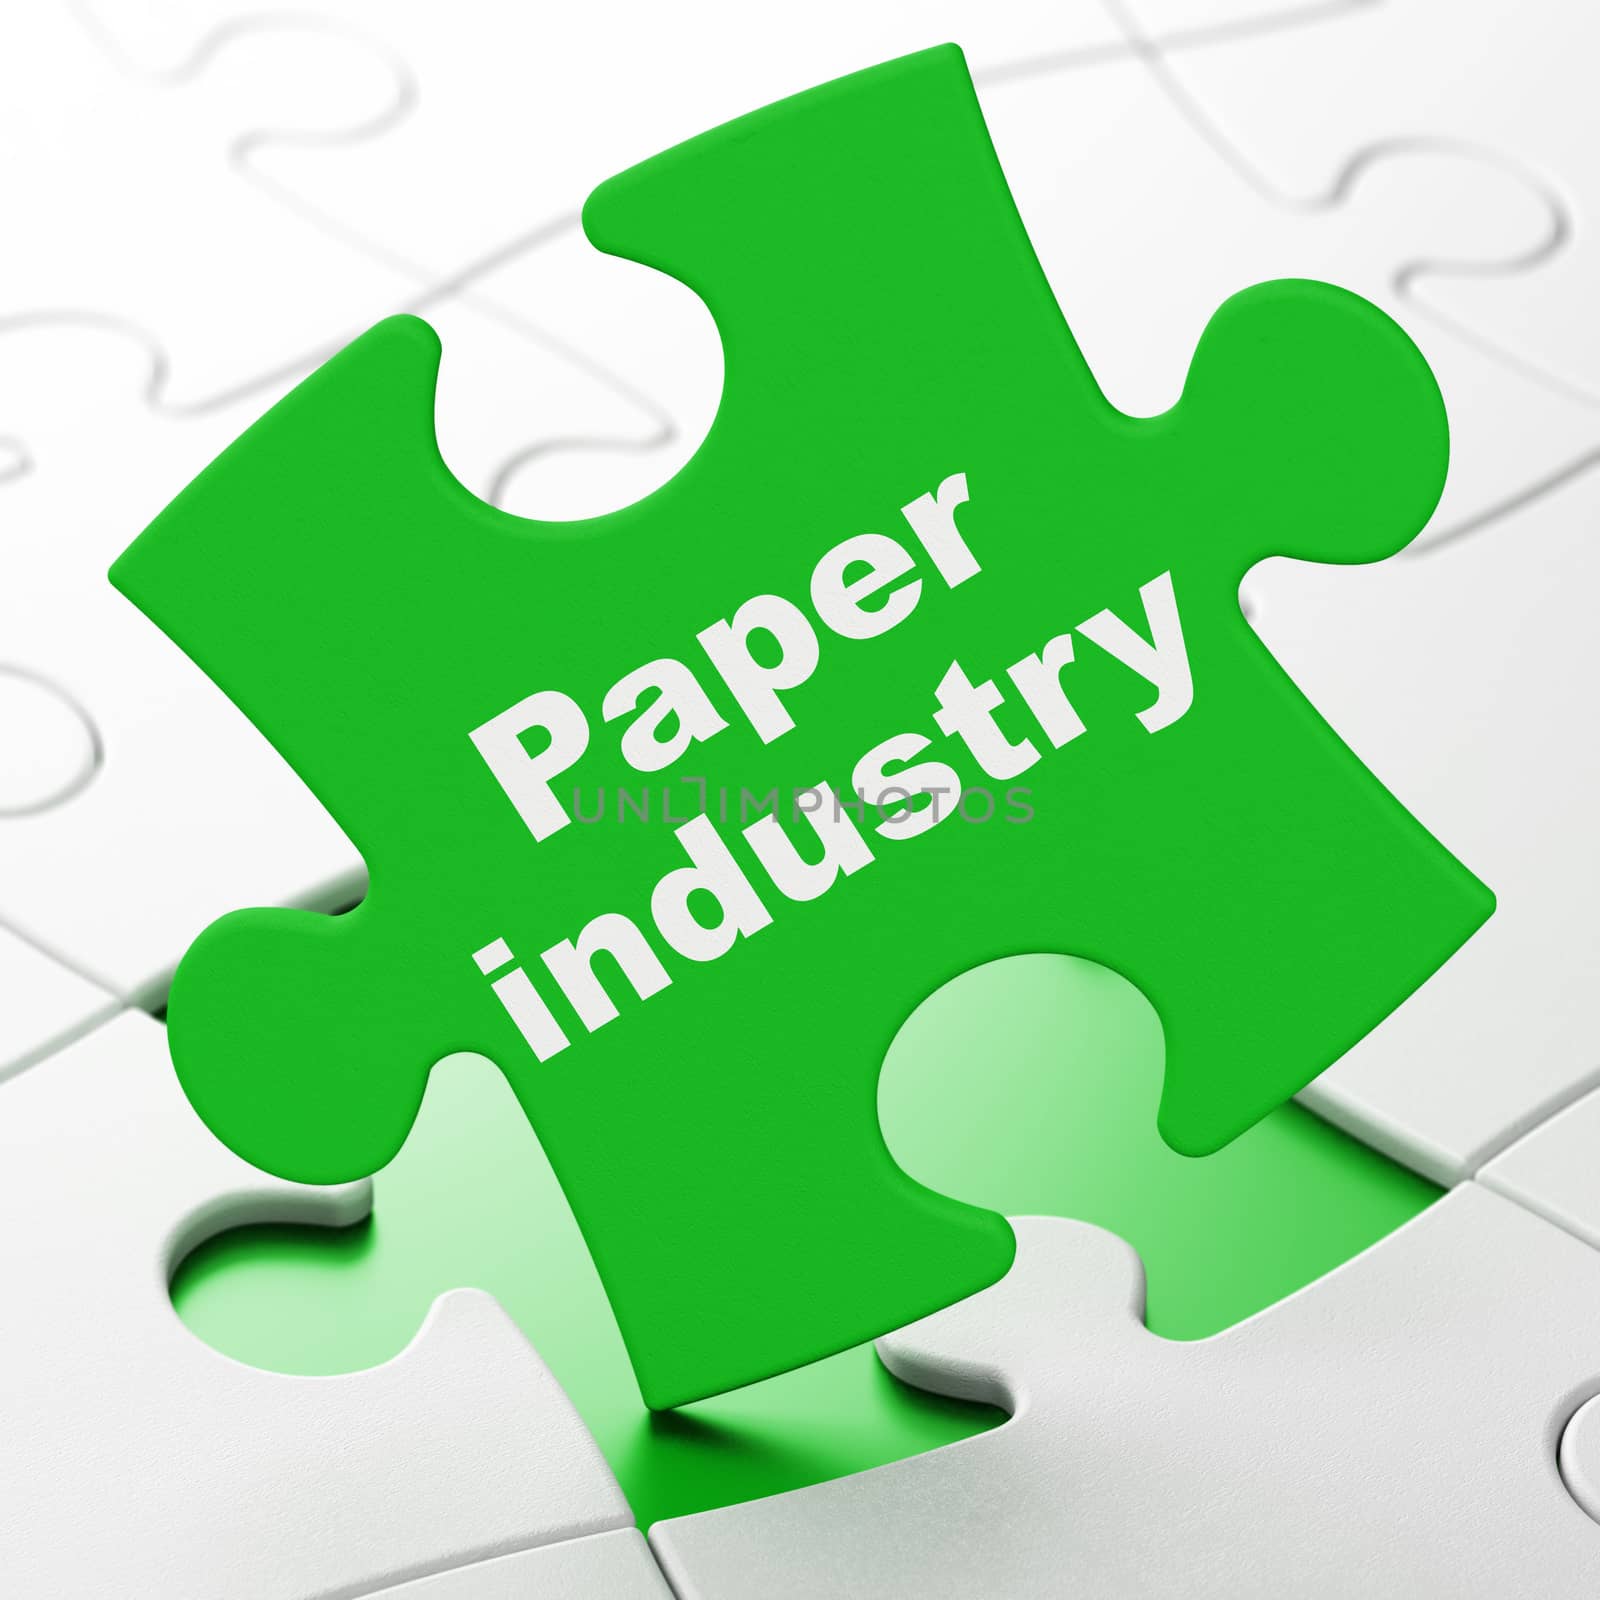 Industry concept: Paper Industry on puzzle background by maxkabakov